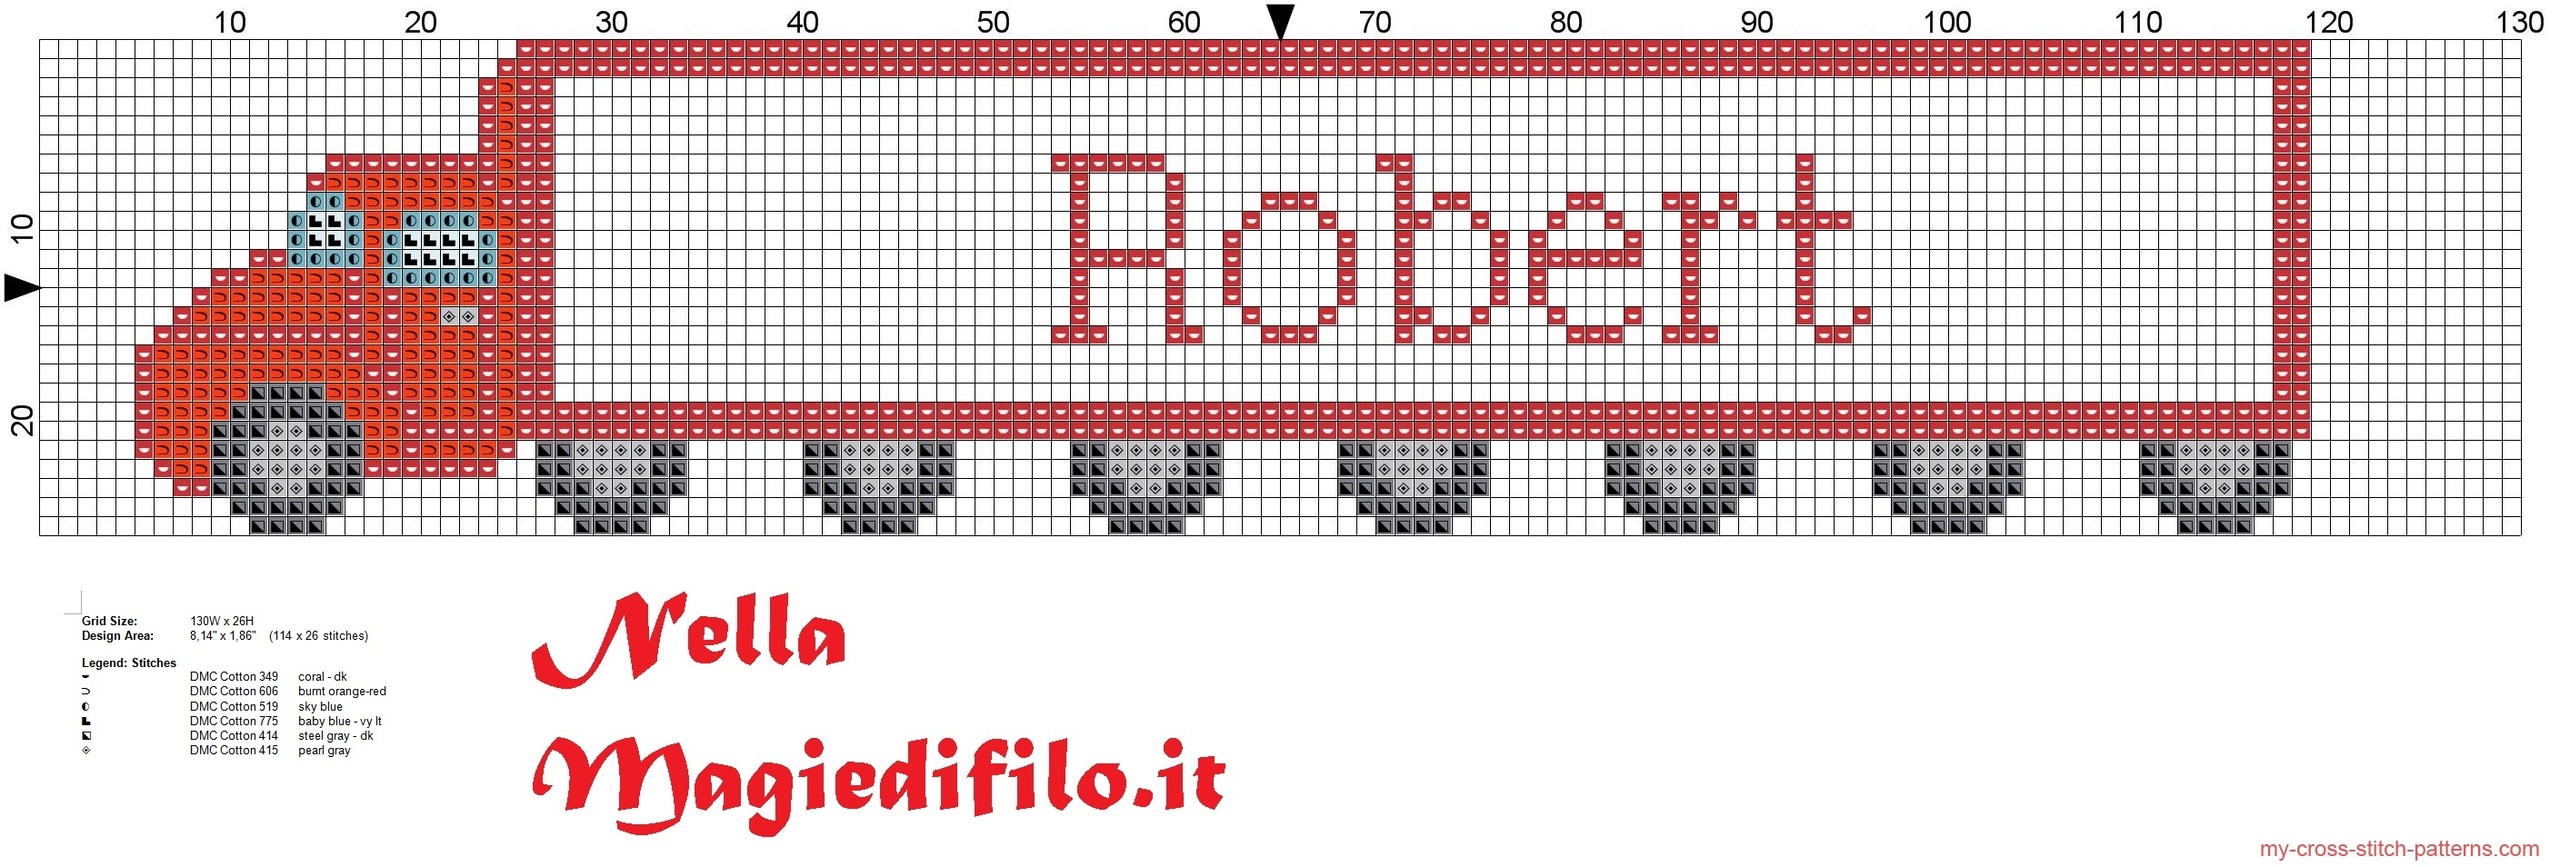 name_robert_with_truck_cross_stitch_pattern